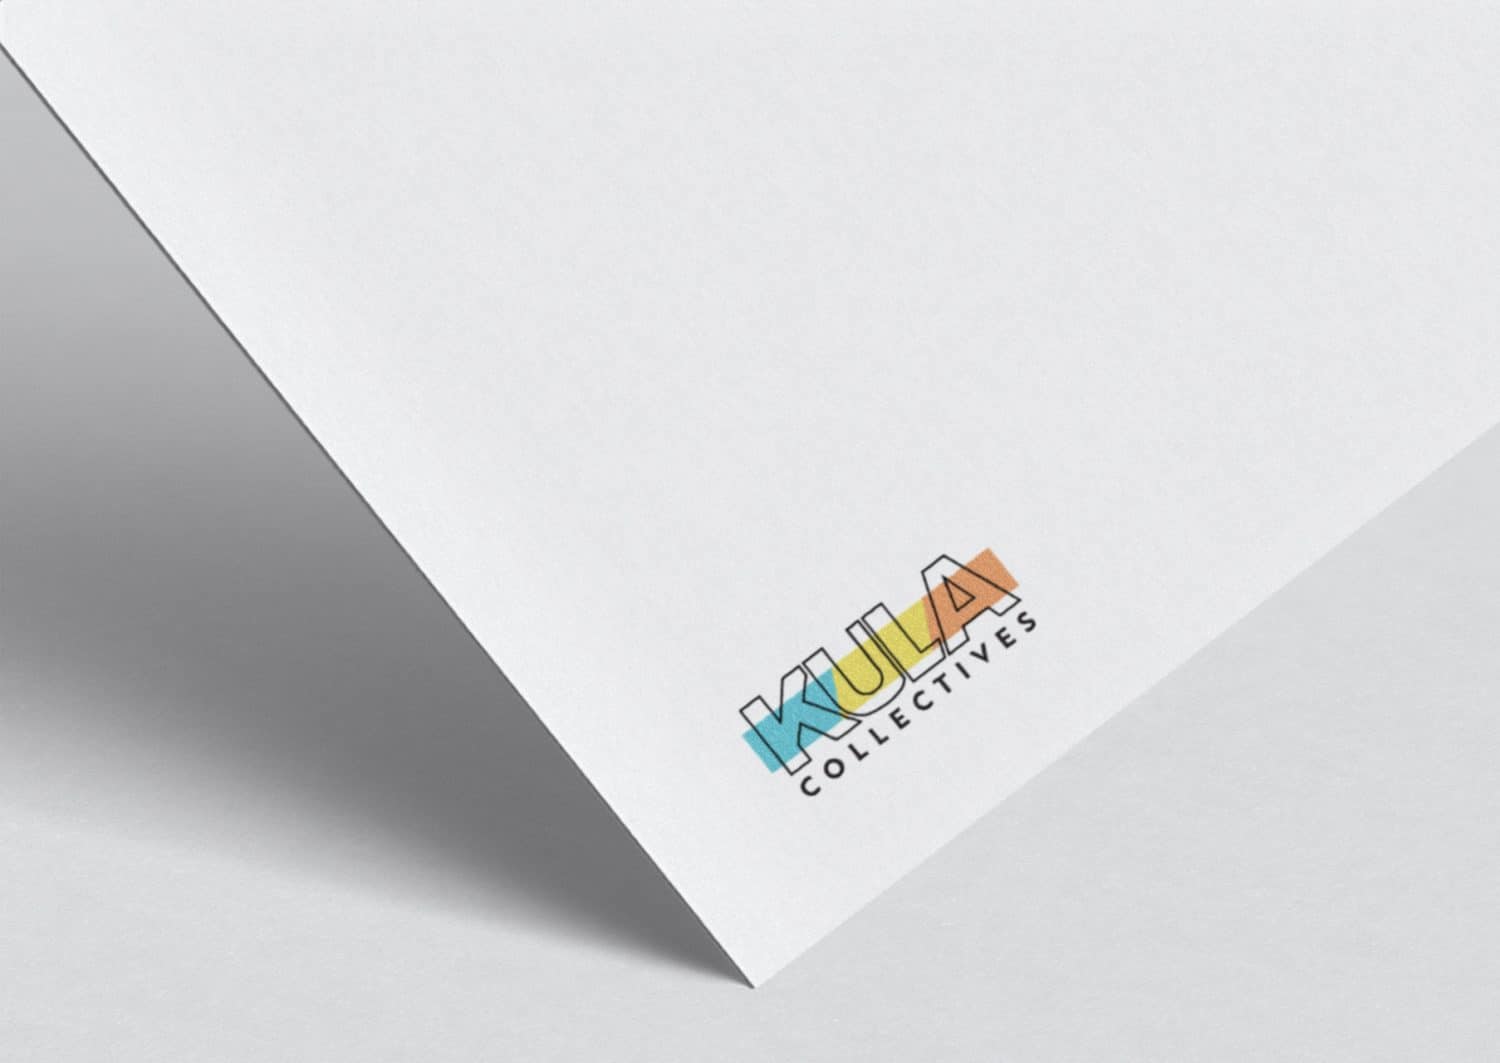 Kula Collective Logo By Jordis Small of Stellen Design